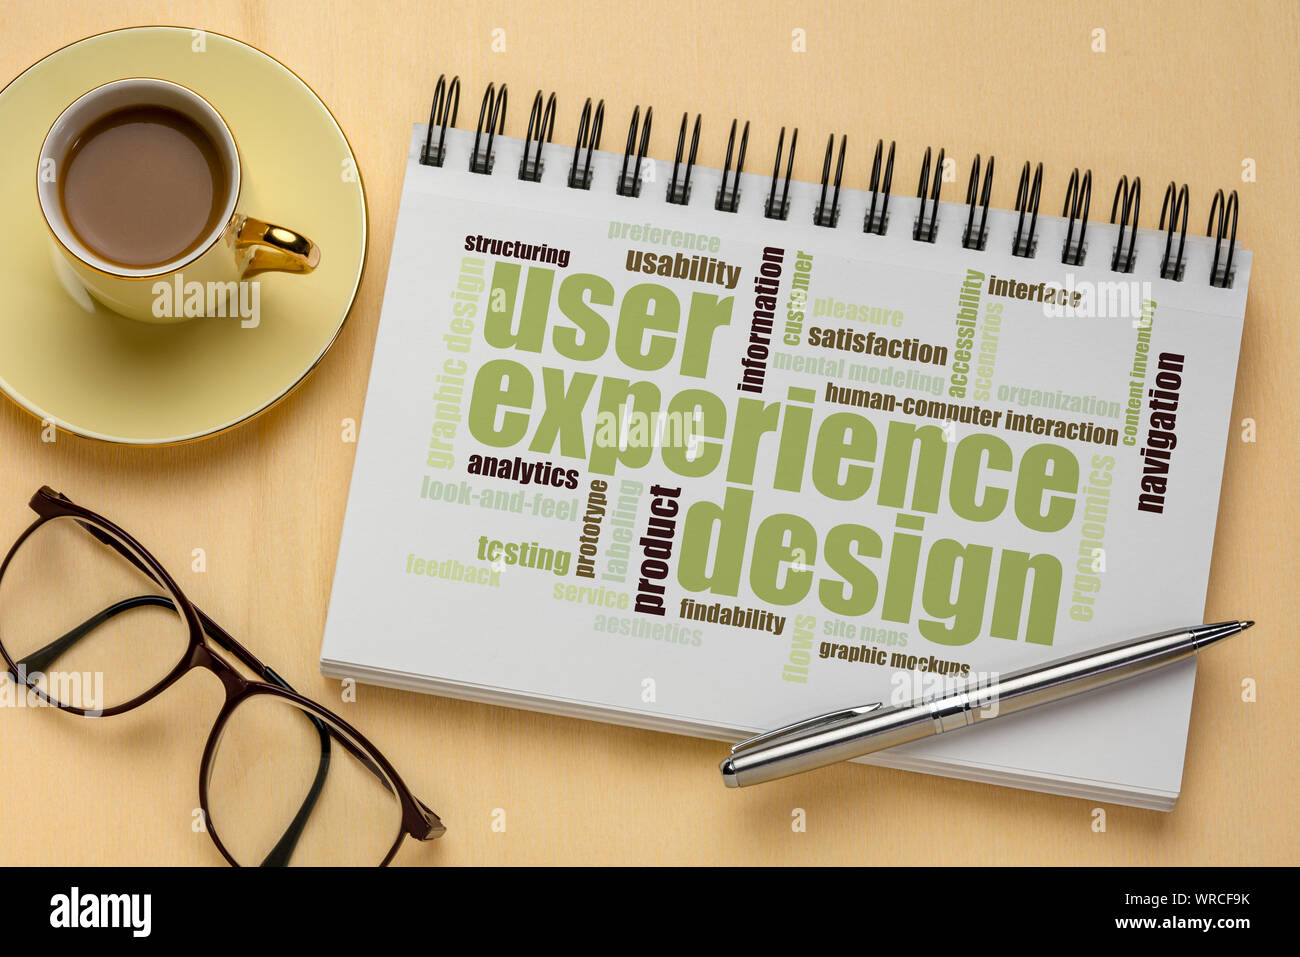 user experience design concept - word cloud in a spiral sketchbook with a cup of coffee Stock Photo